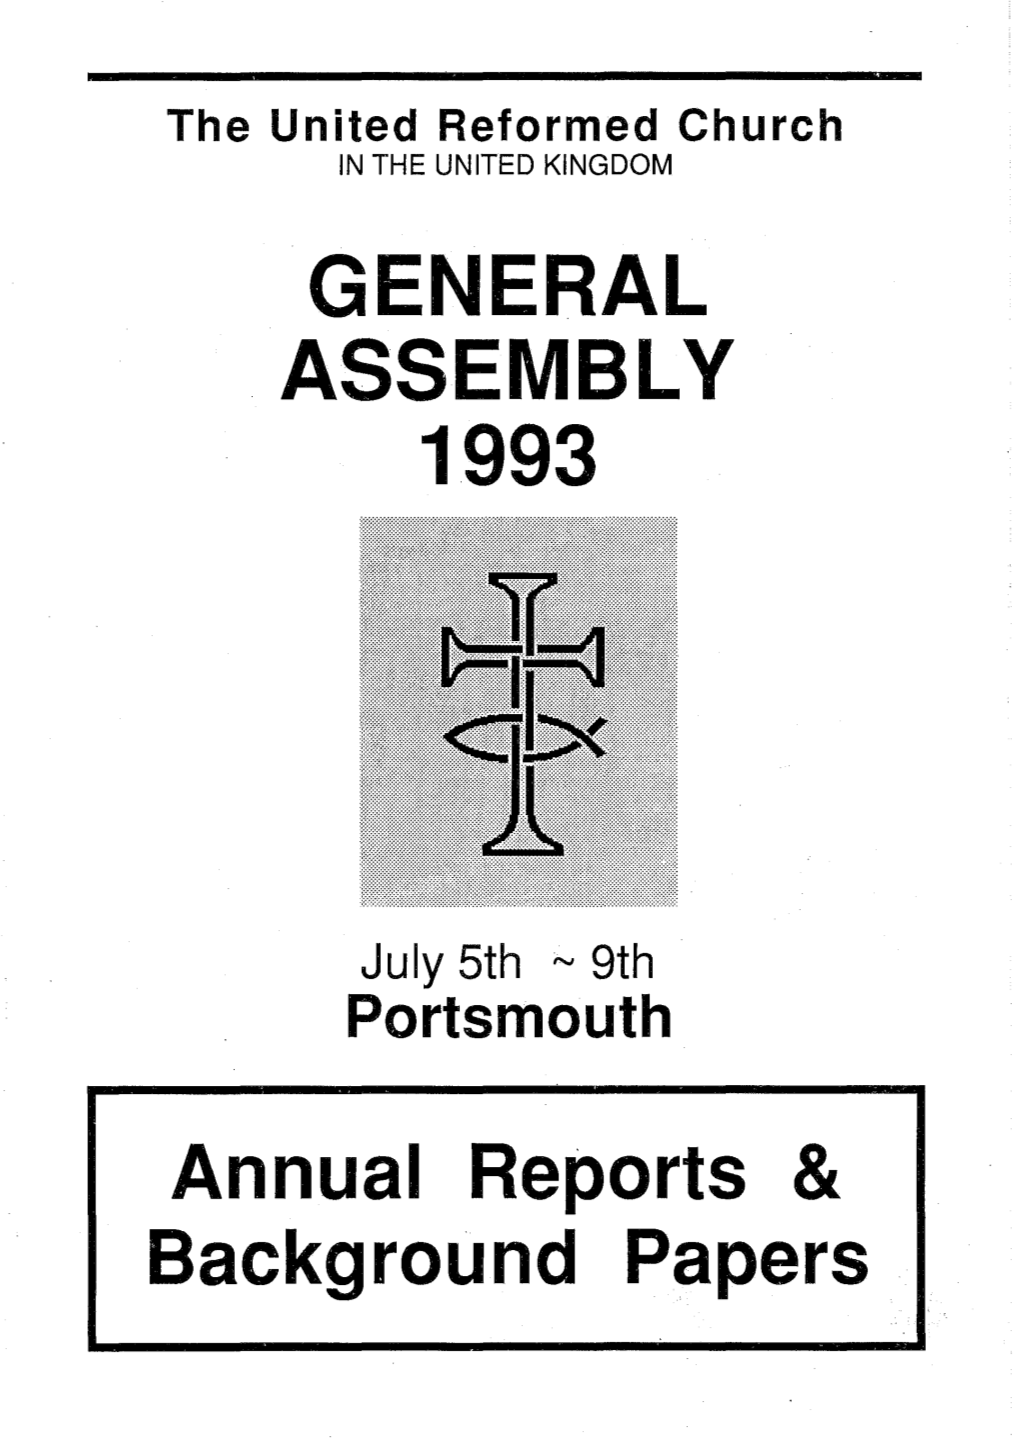 General Assembly 1993